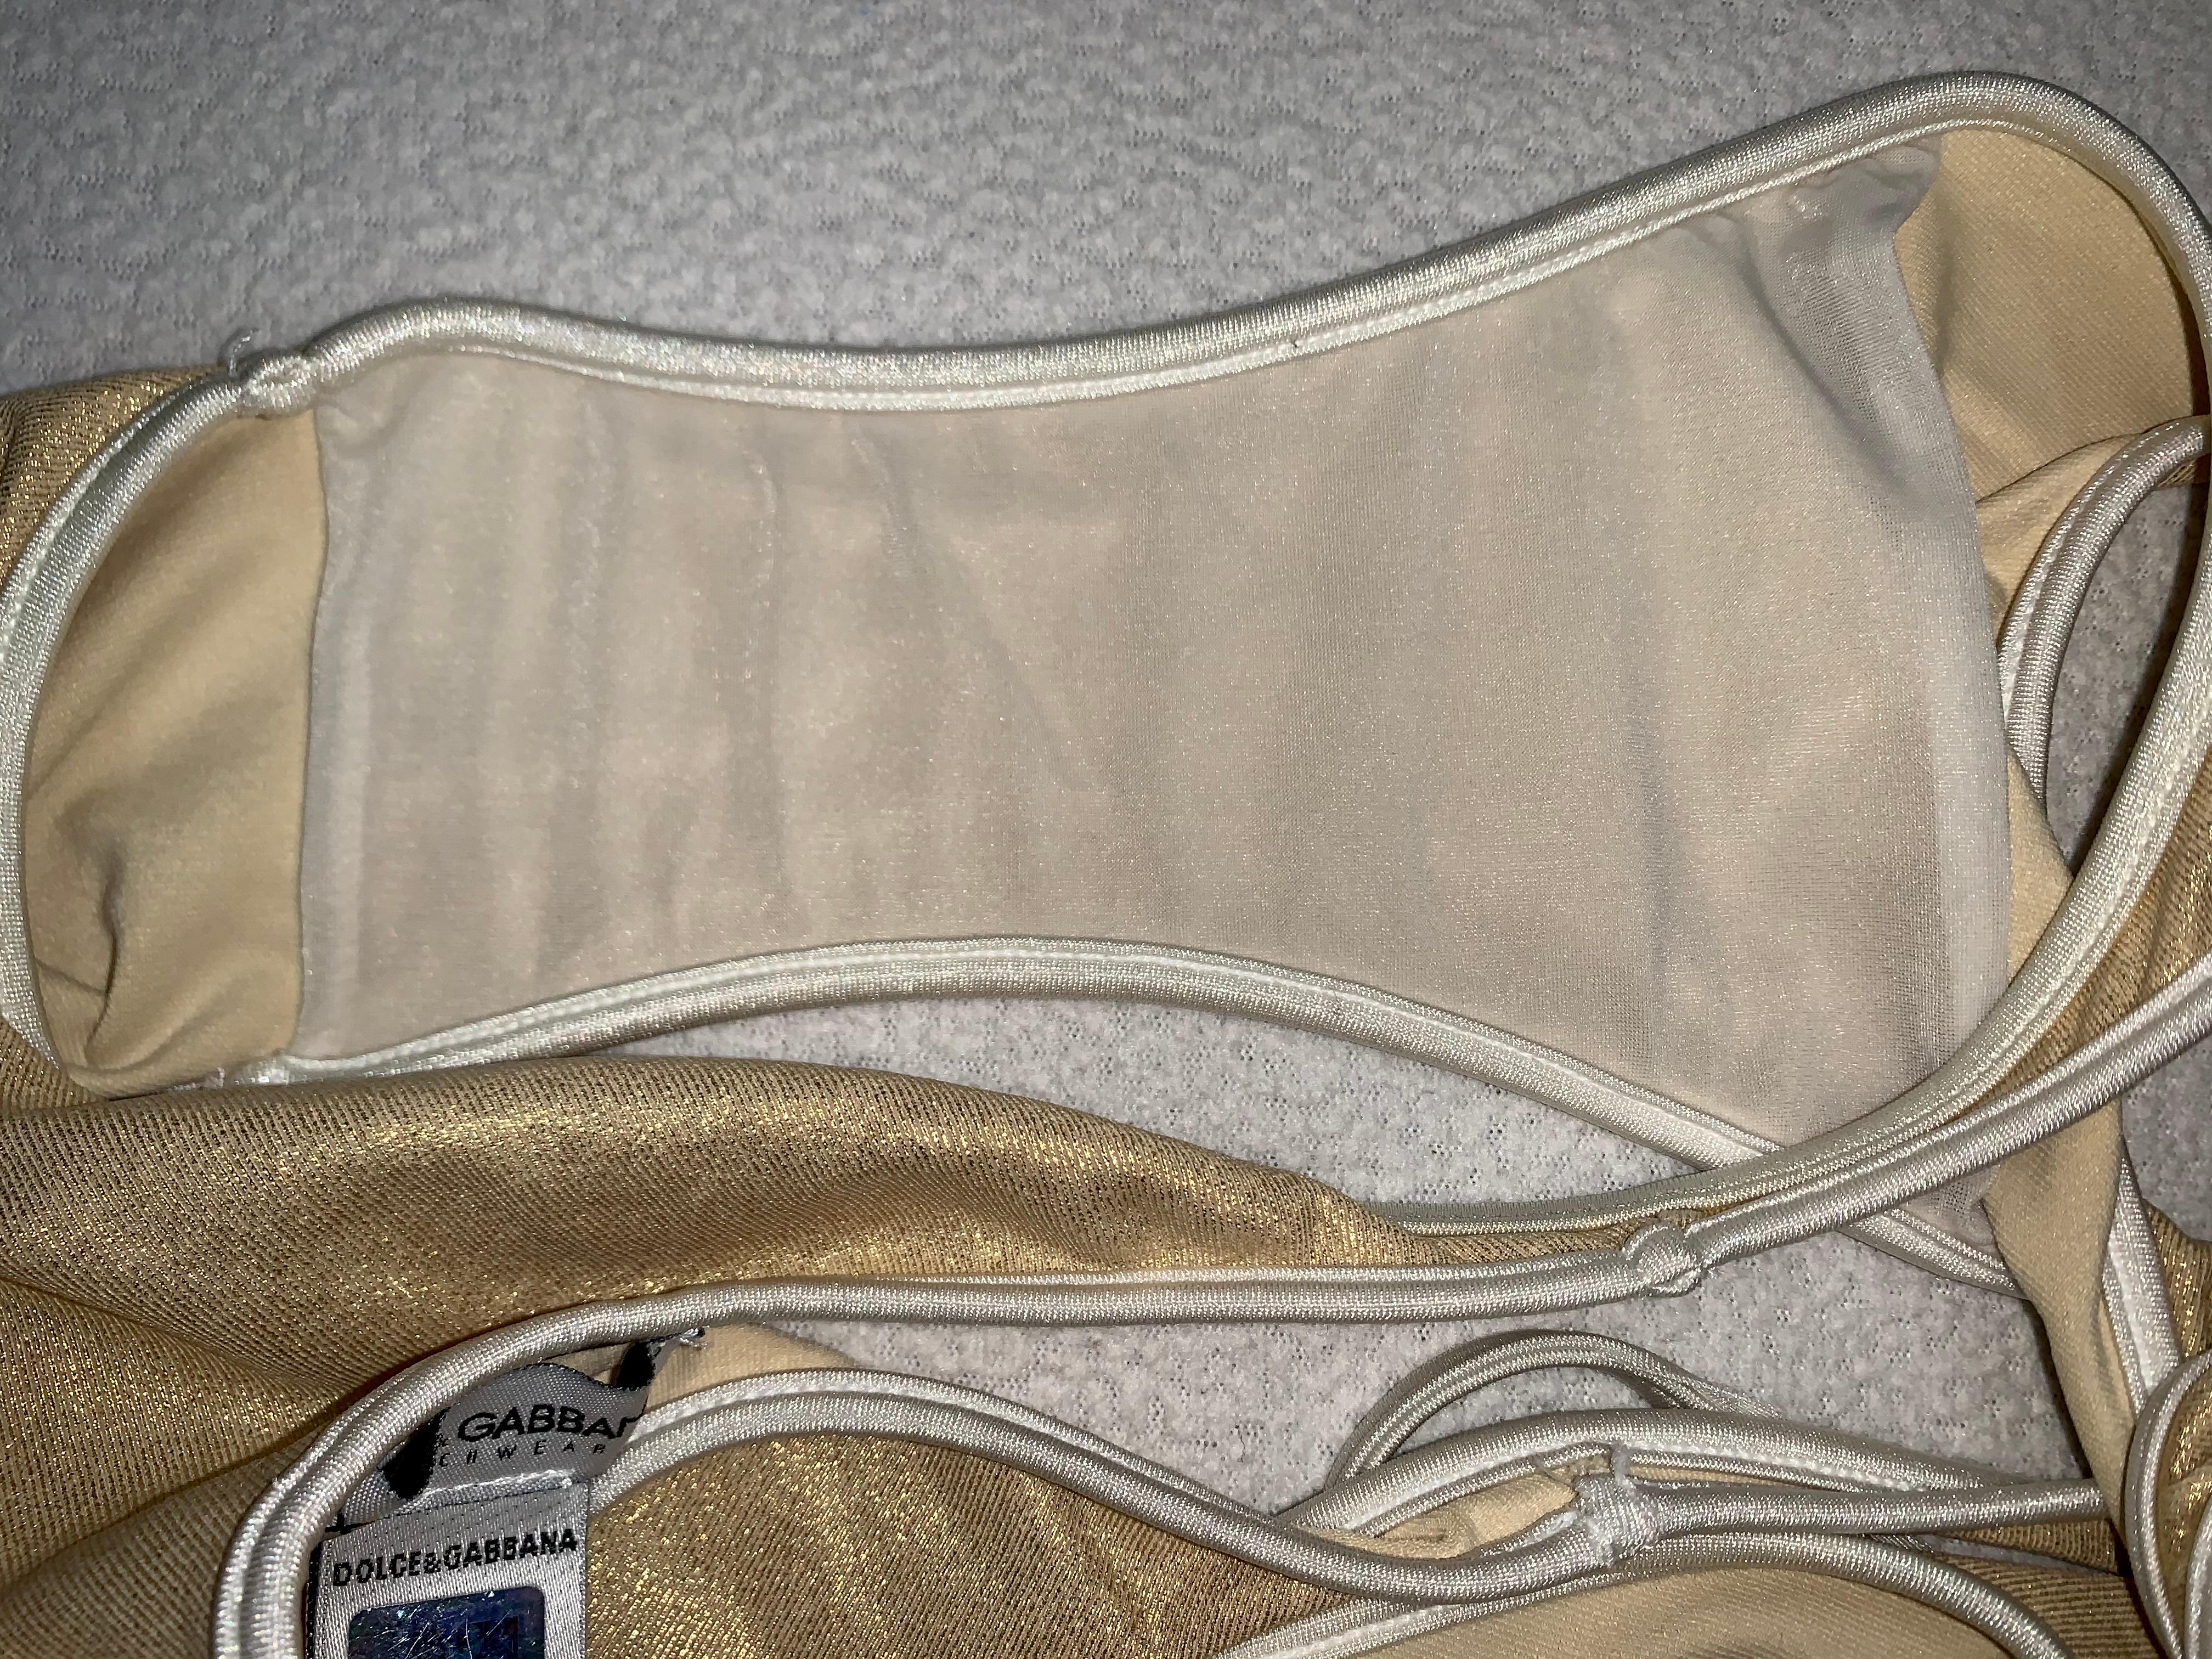 S/S 2003 Dolce & Gabbana Gold Monokini Cut-Out Swimsuit In Good Condition In Yukon, OK